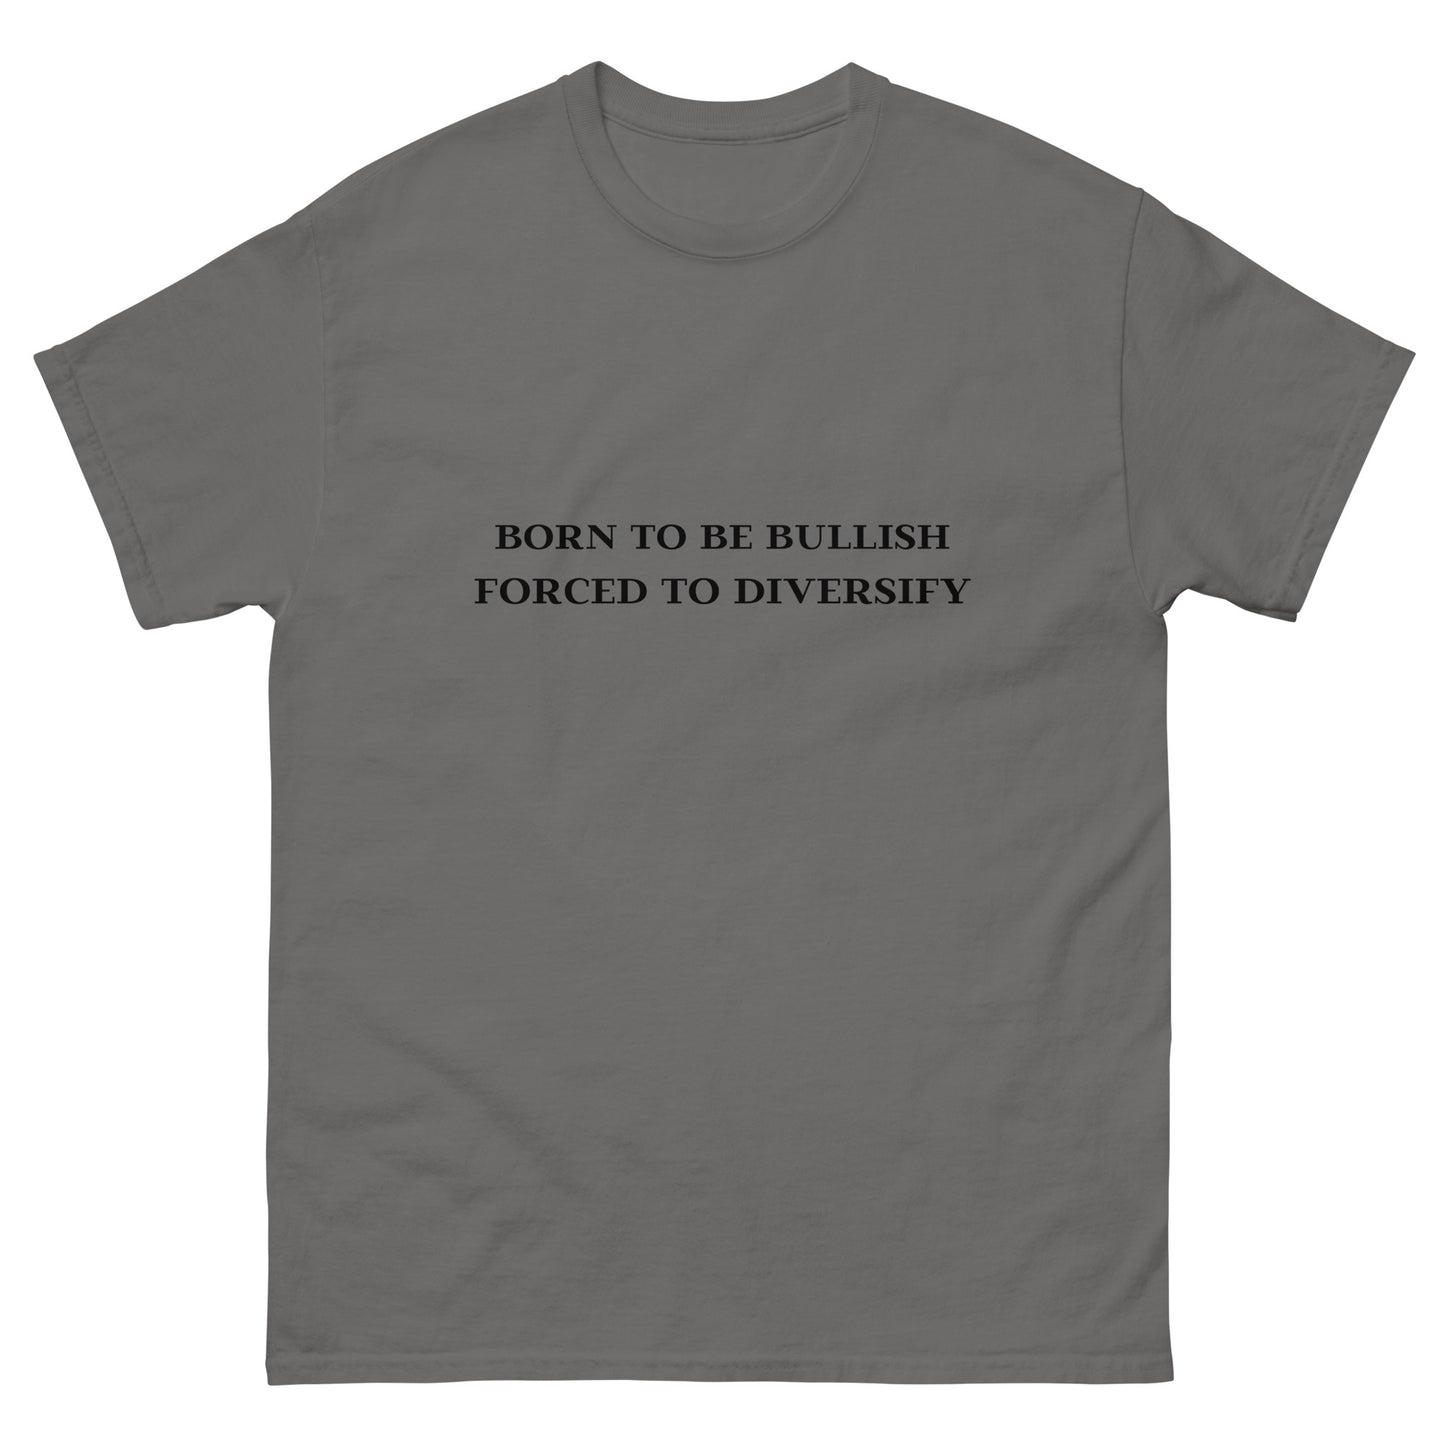 BORNED TO BE BULLISH FORCED TO DIVERSIFY tee